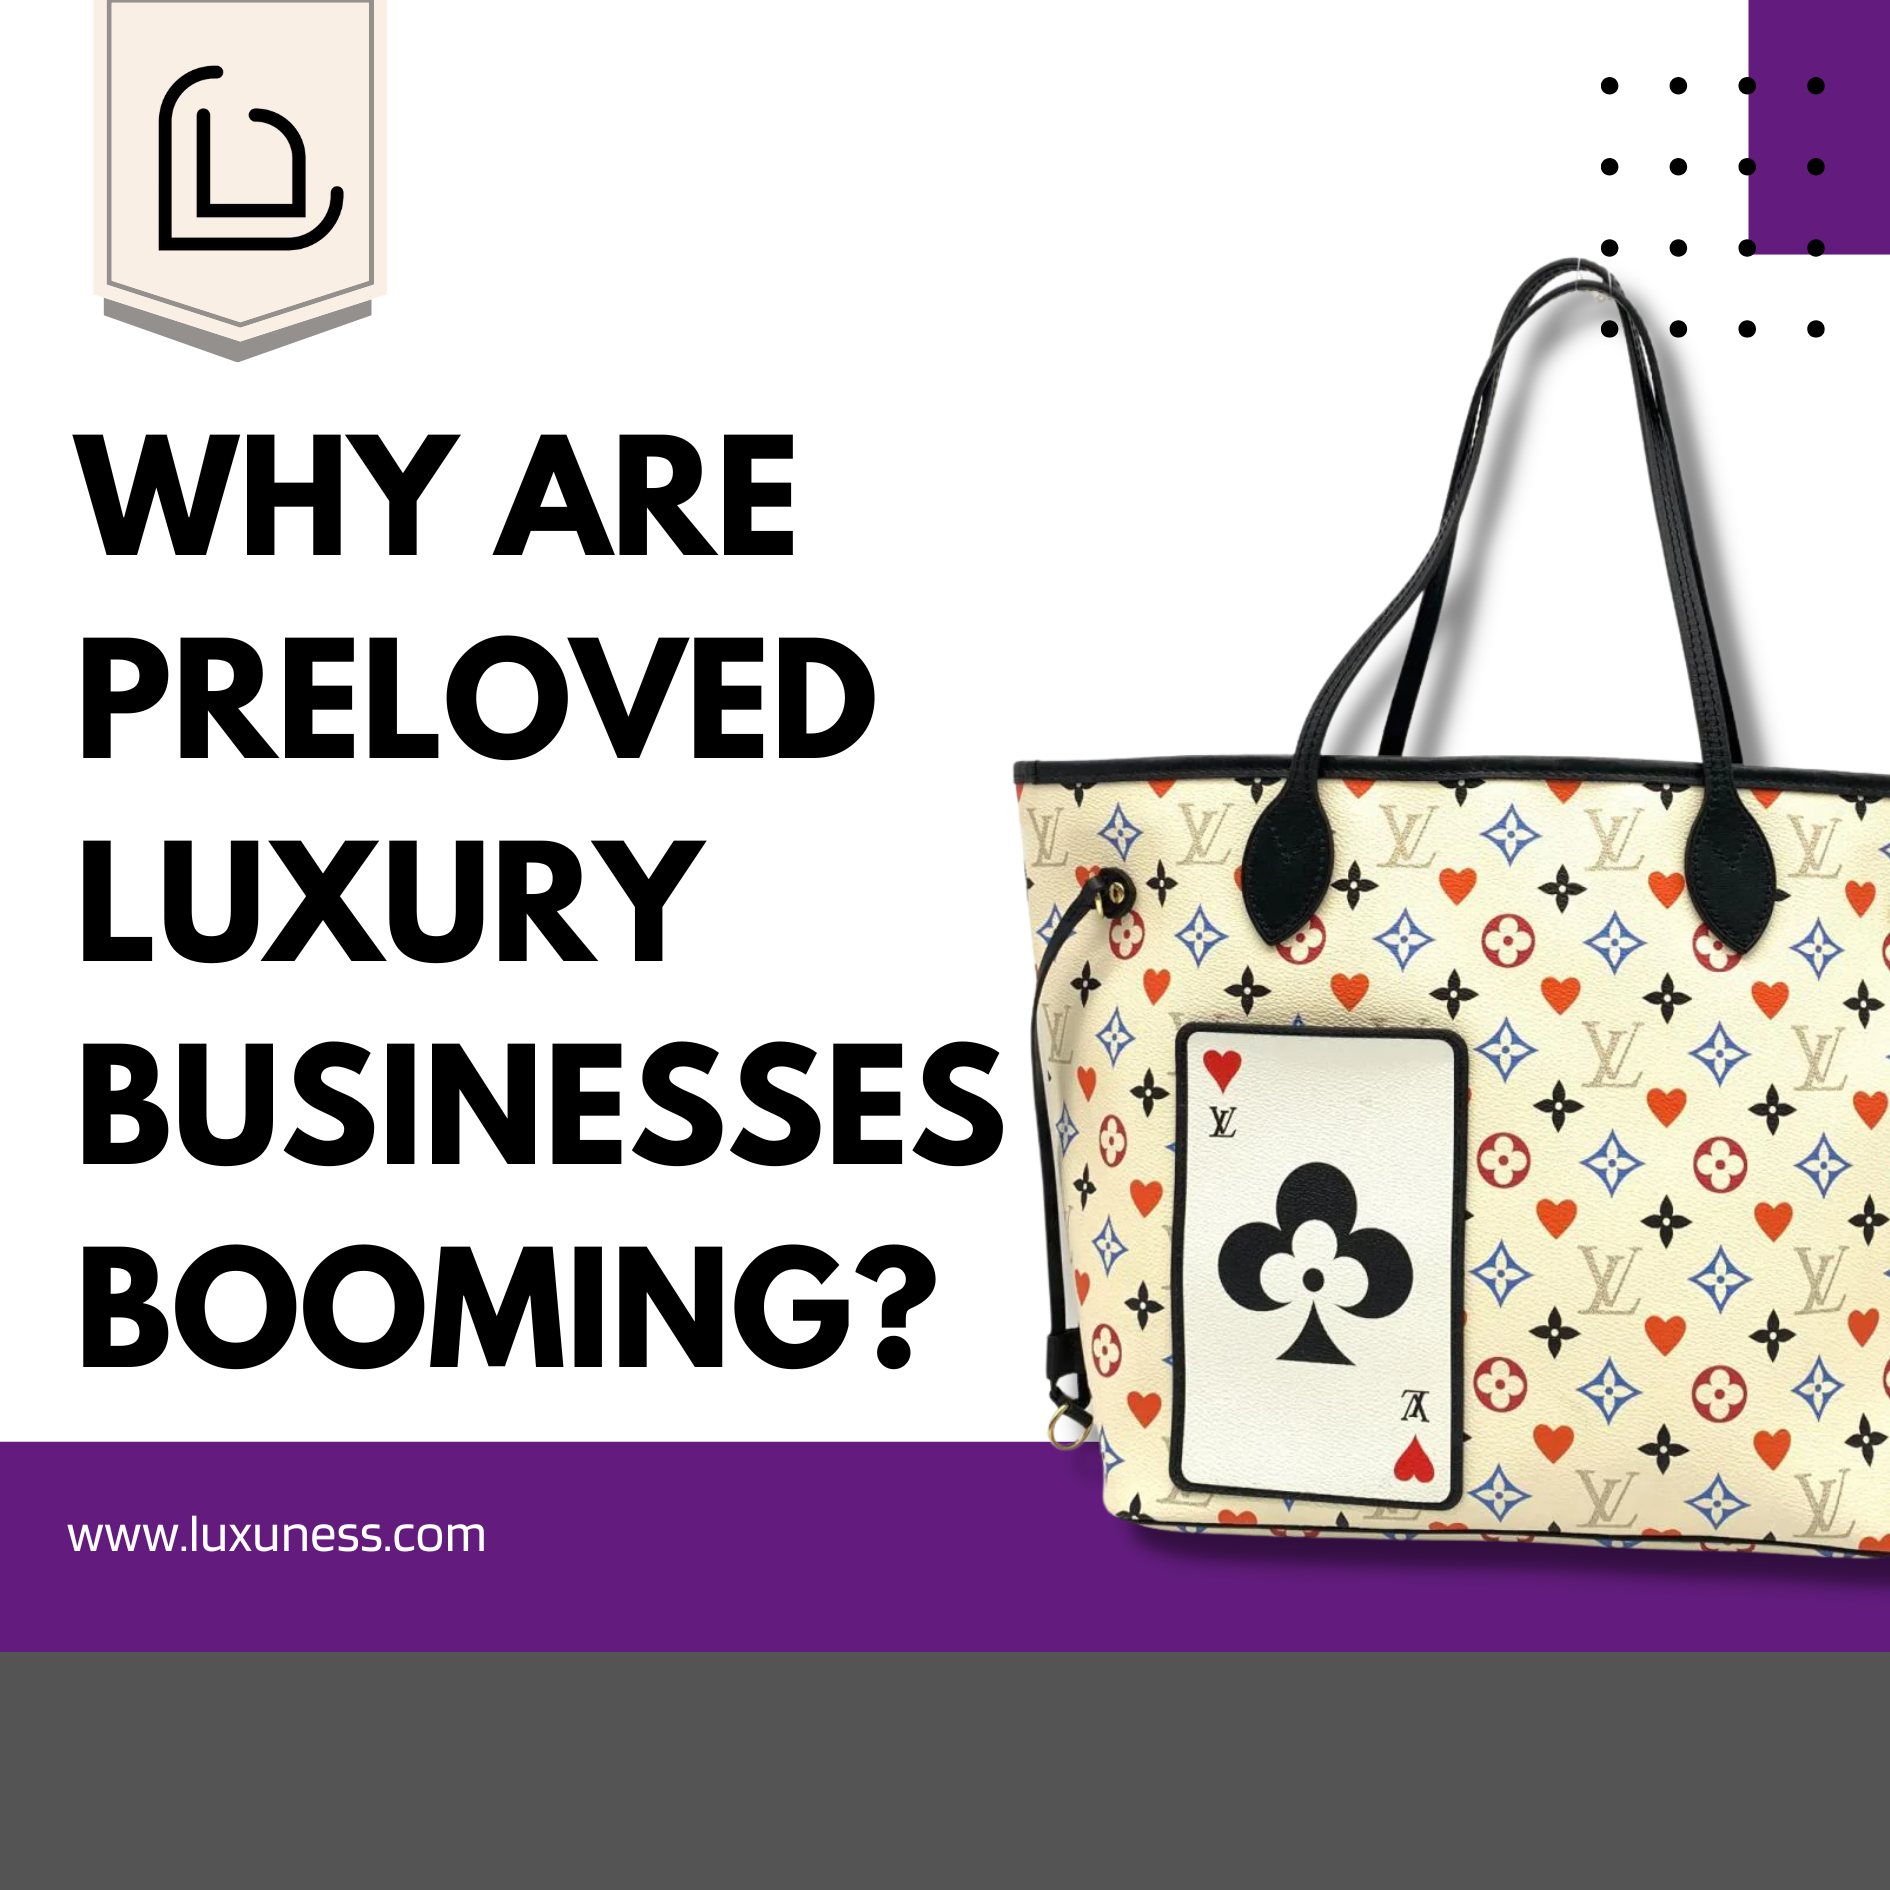 Why are Preloved Luxury Businesses Booming?